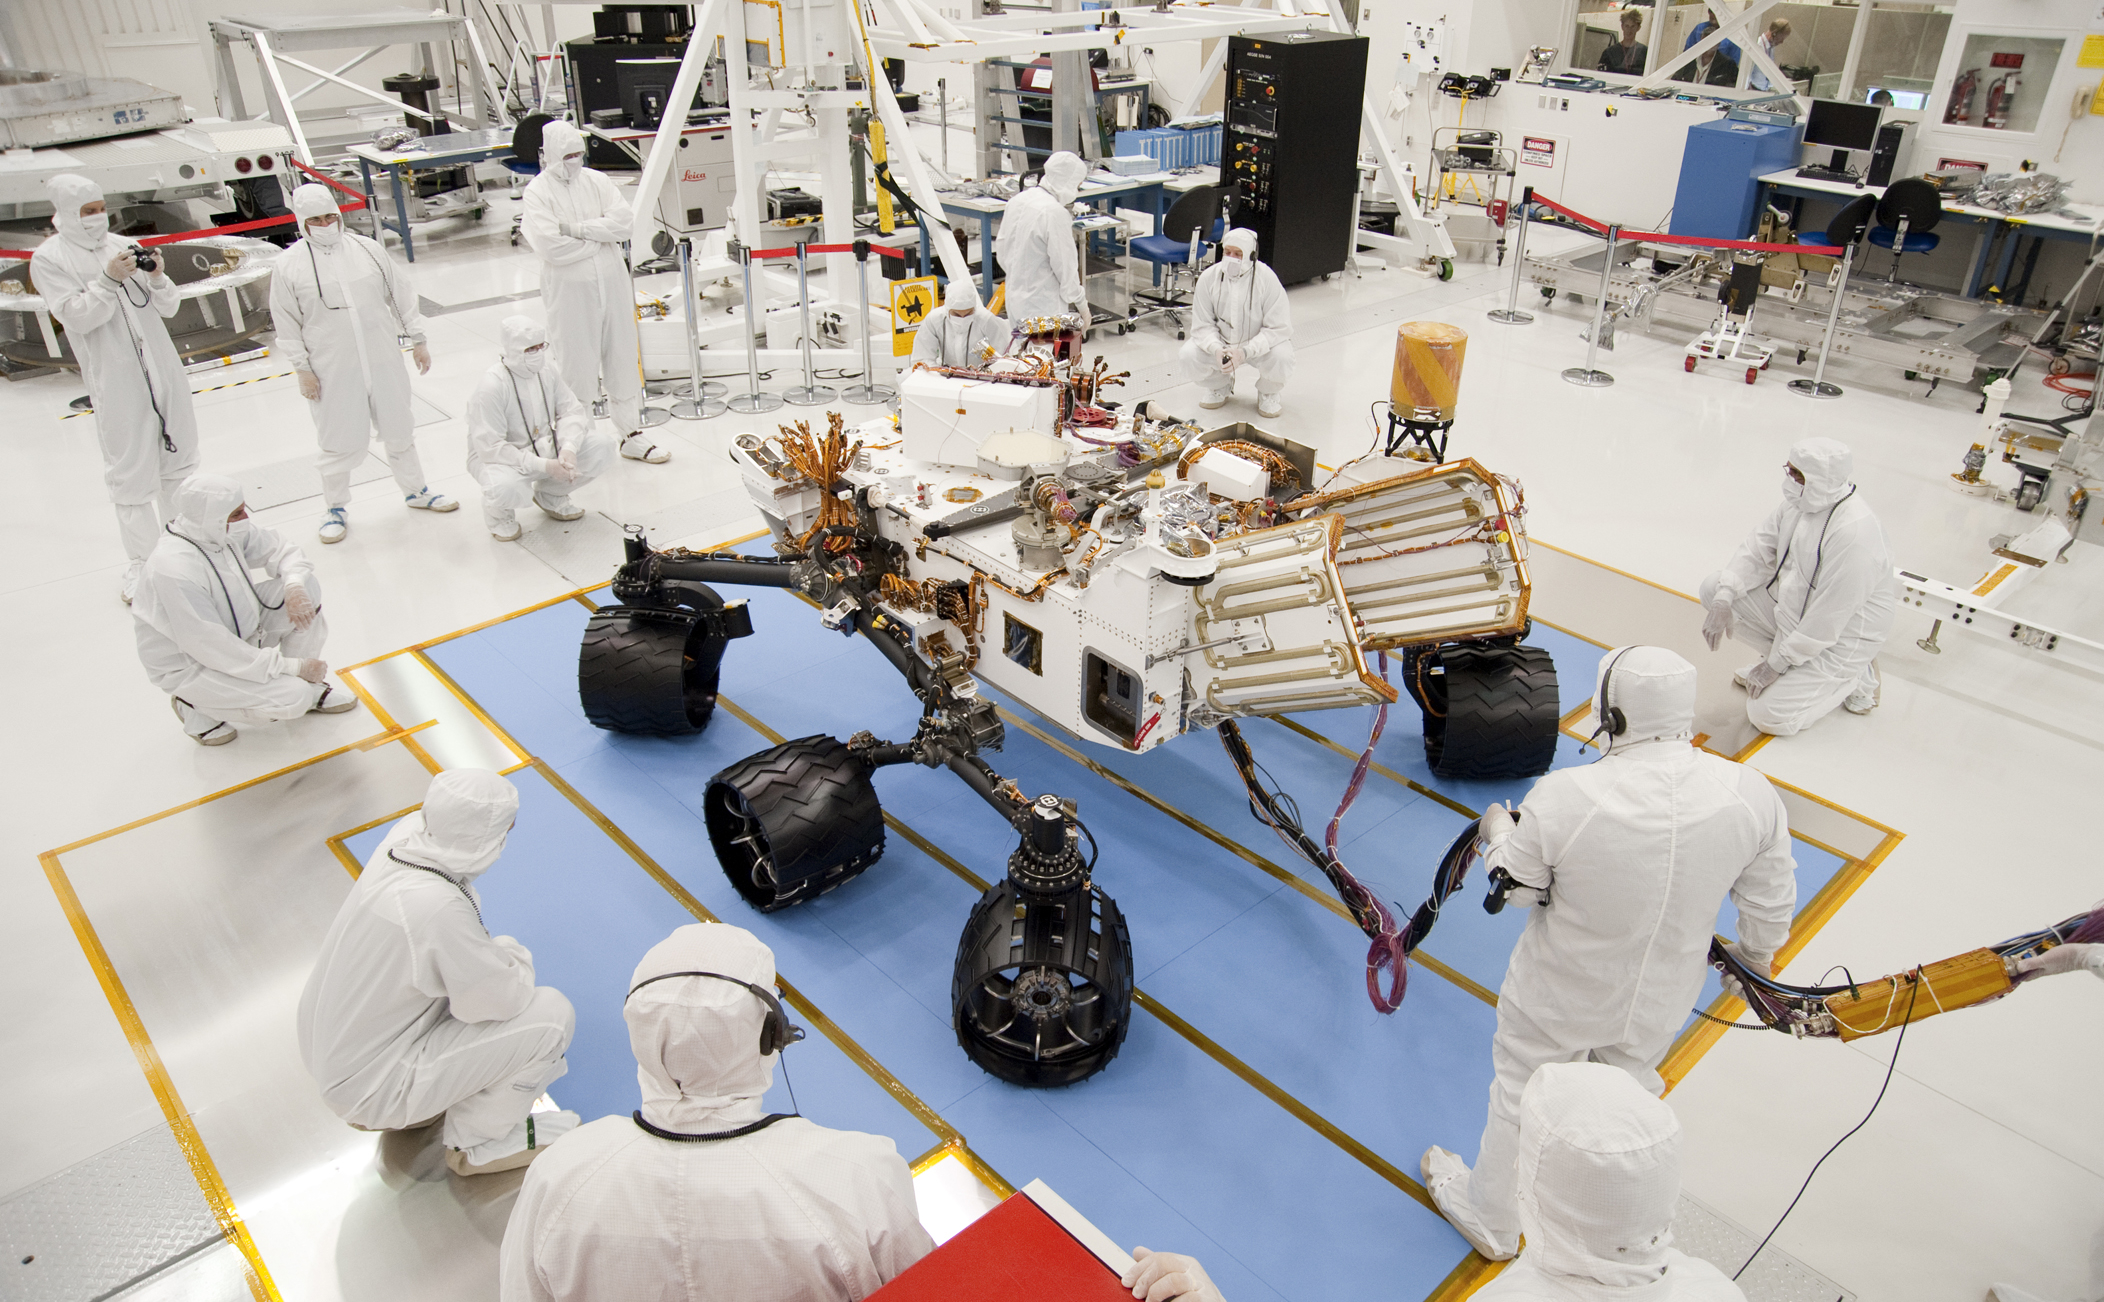 Technicians and engineers in clean-room garb monitor the first drive test of NASA's Curiosity rover, on July 23, 2010.